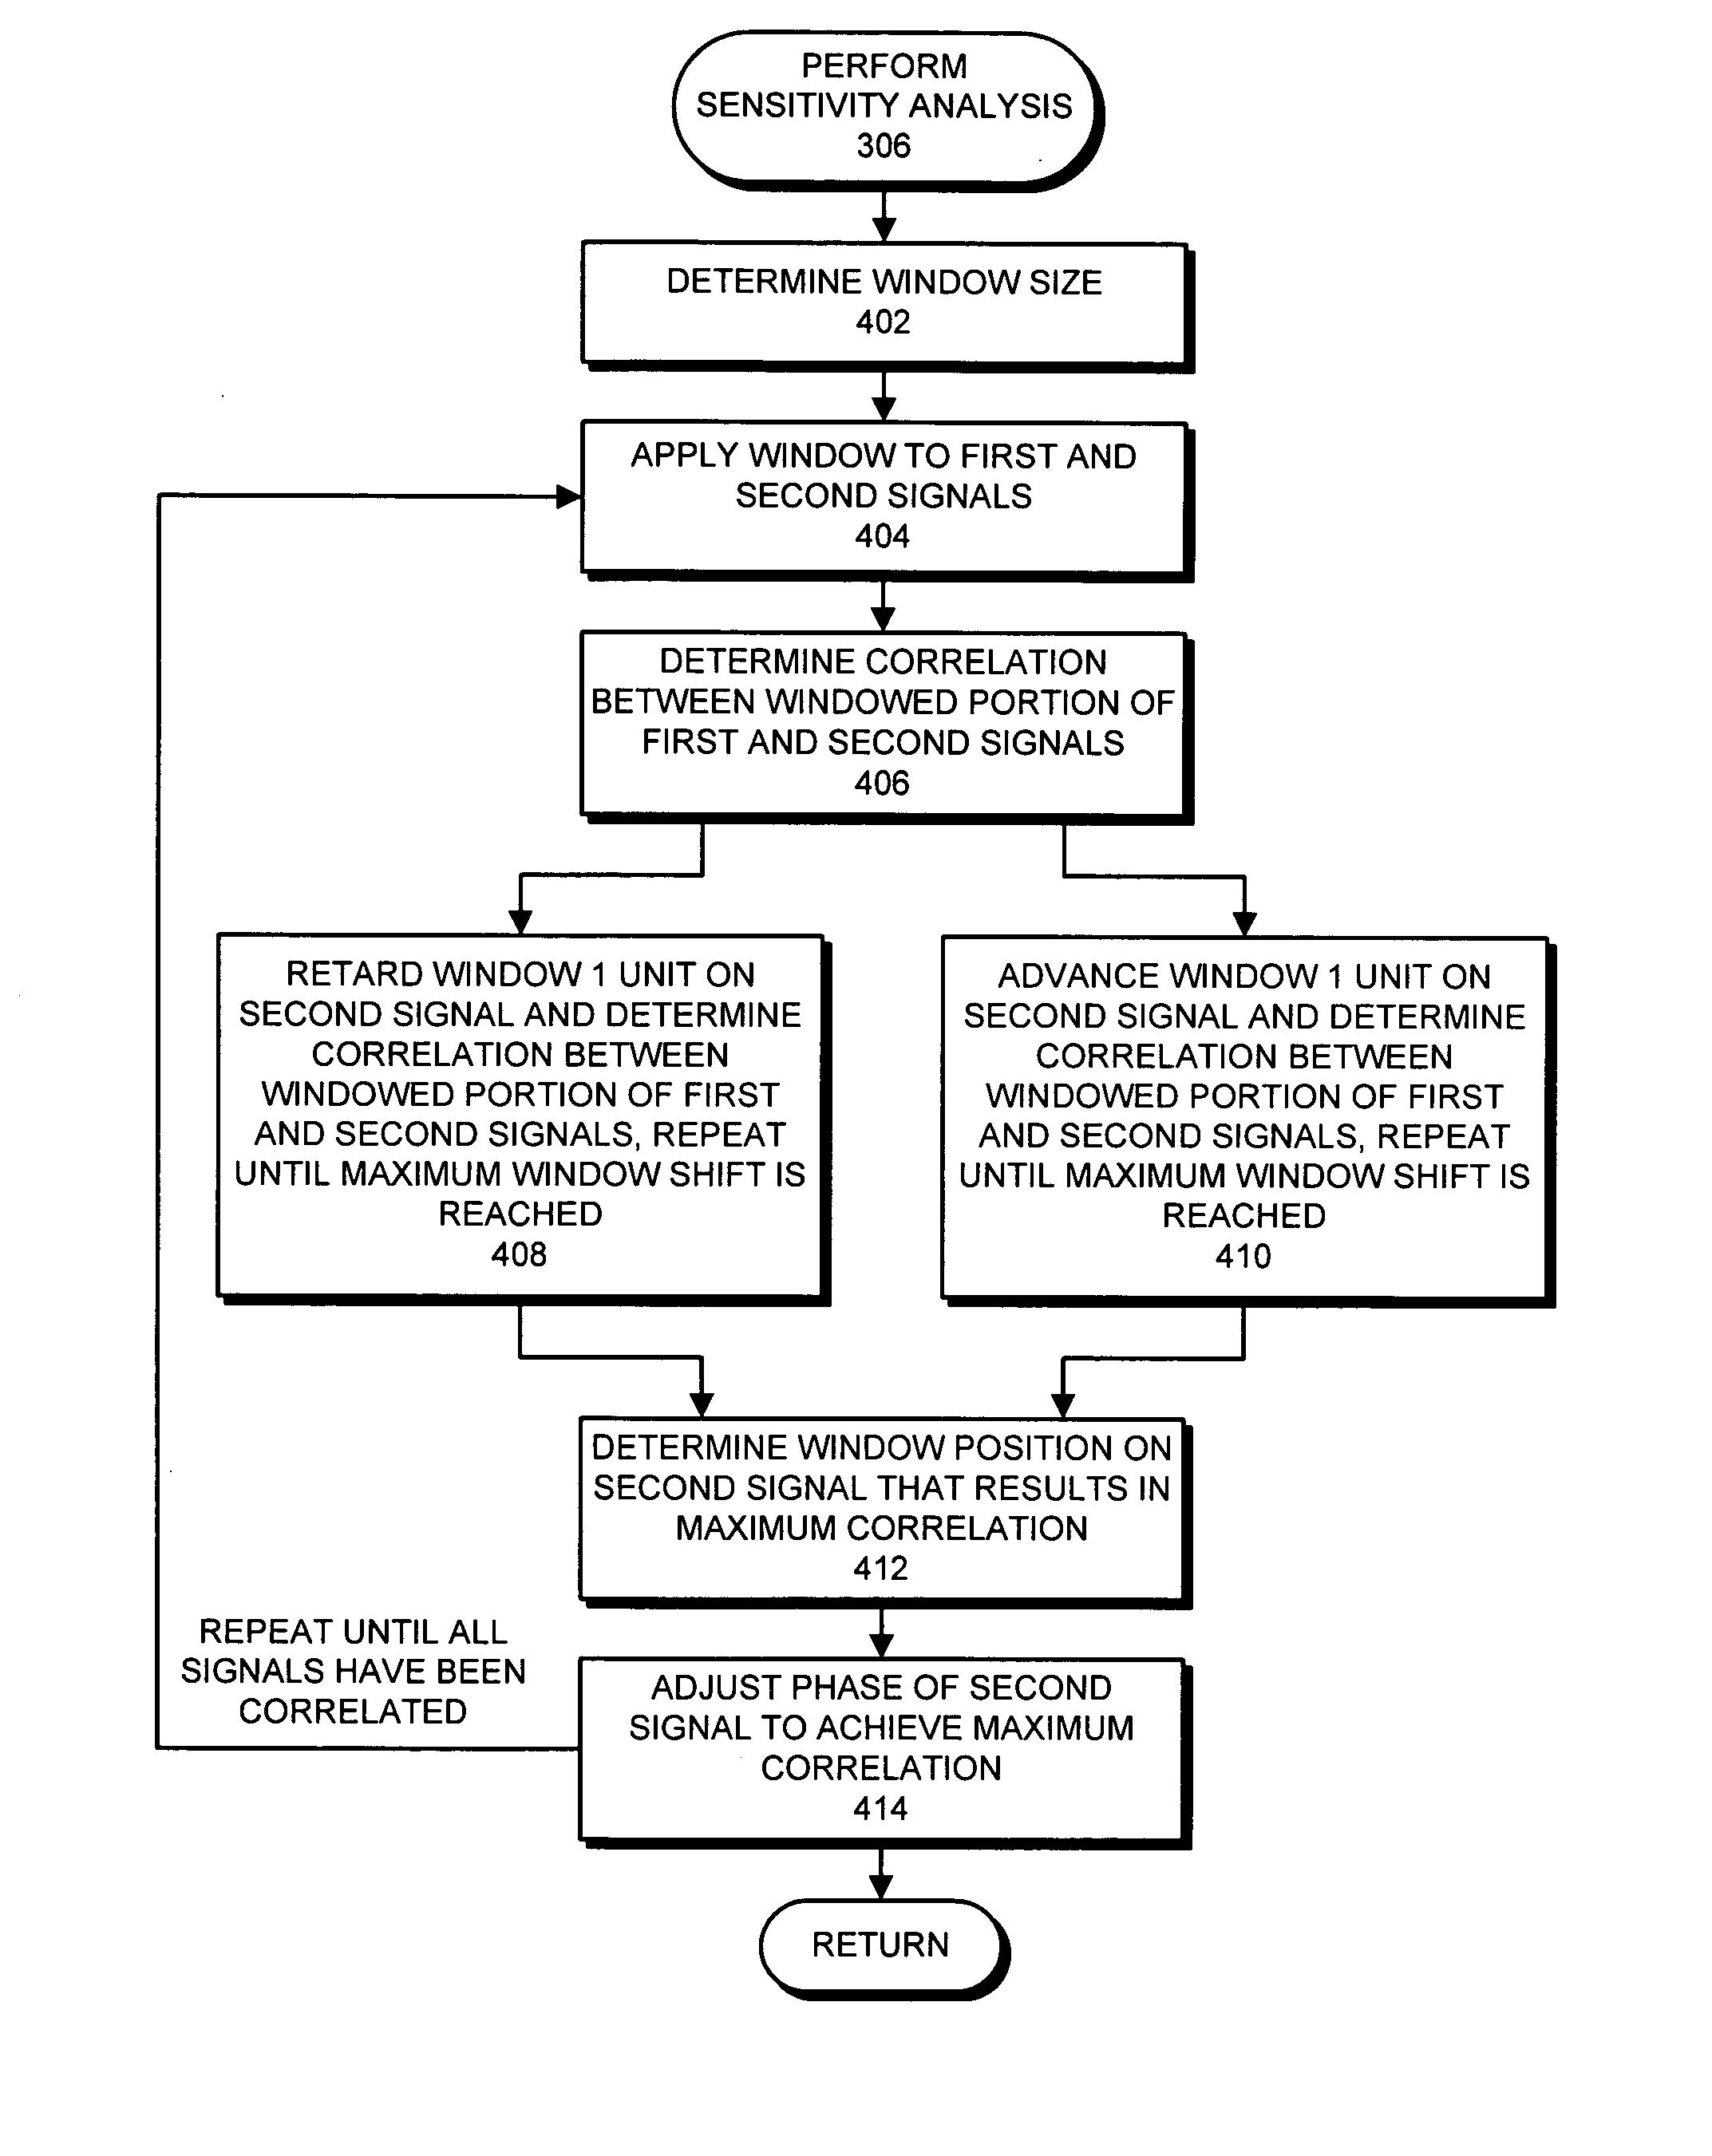 Correlating and aligning monitored signals for computer system performance parameters